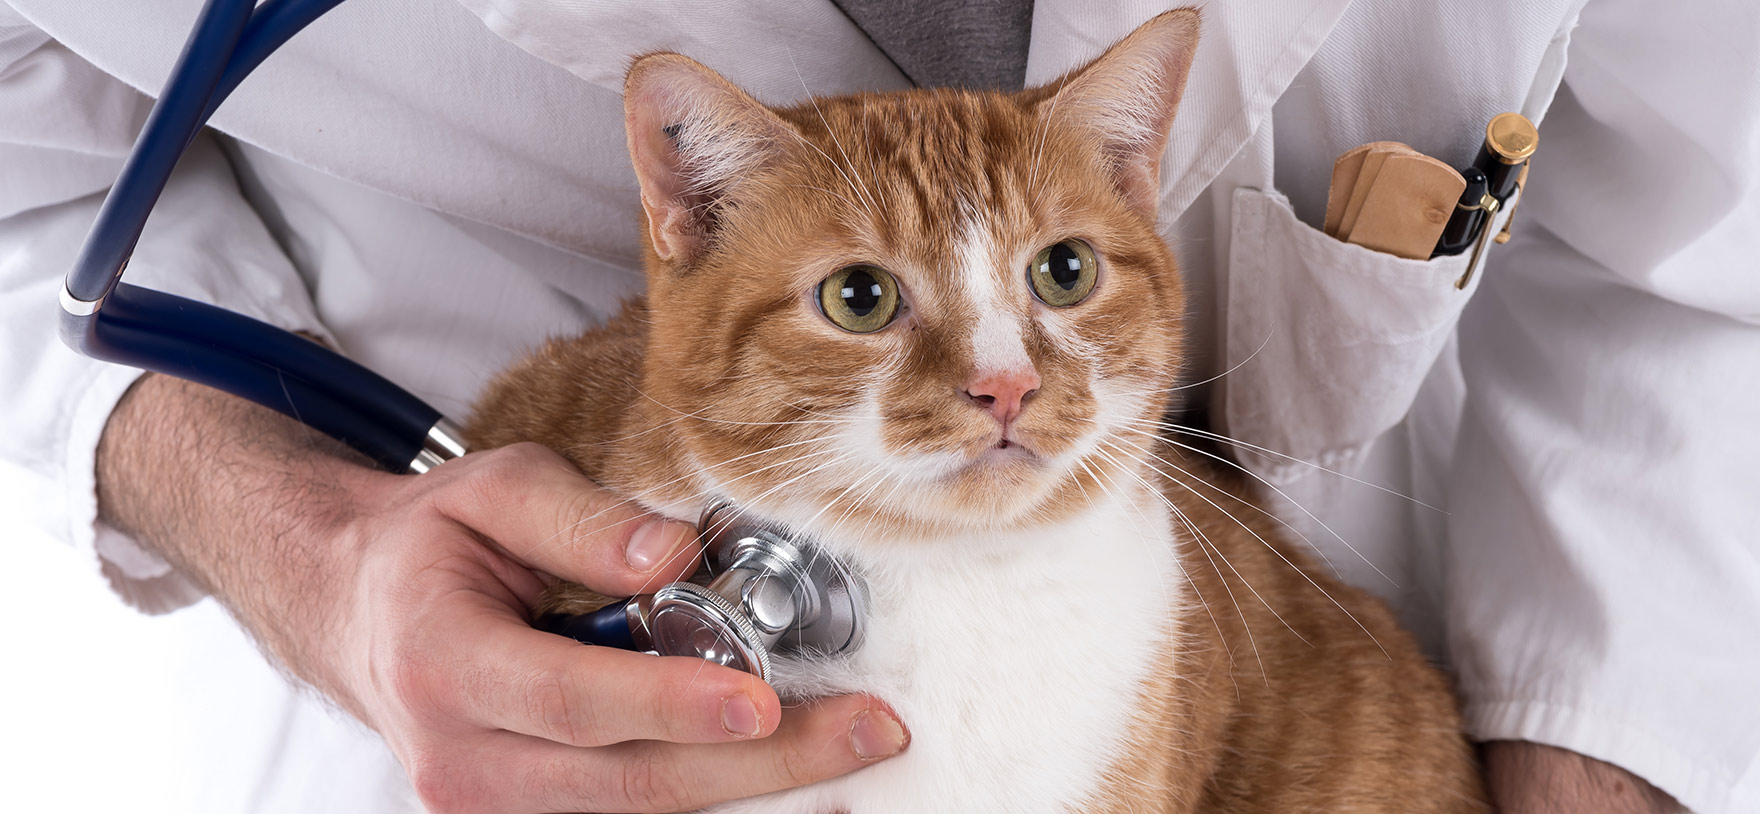 Image of a cat getting a checkup for a quotacy blog about getting life insurance without needing a medical exam